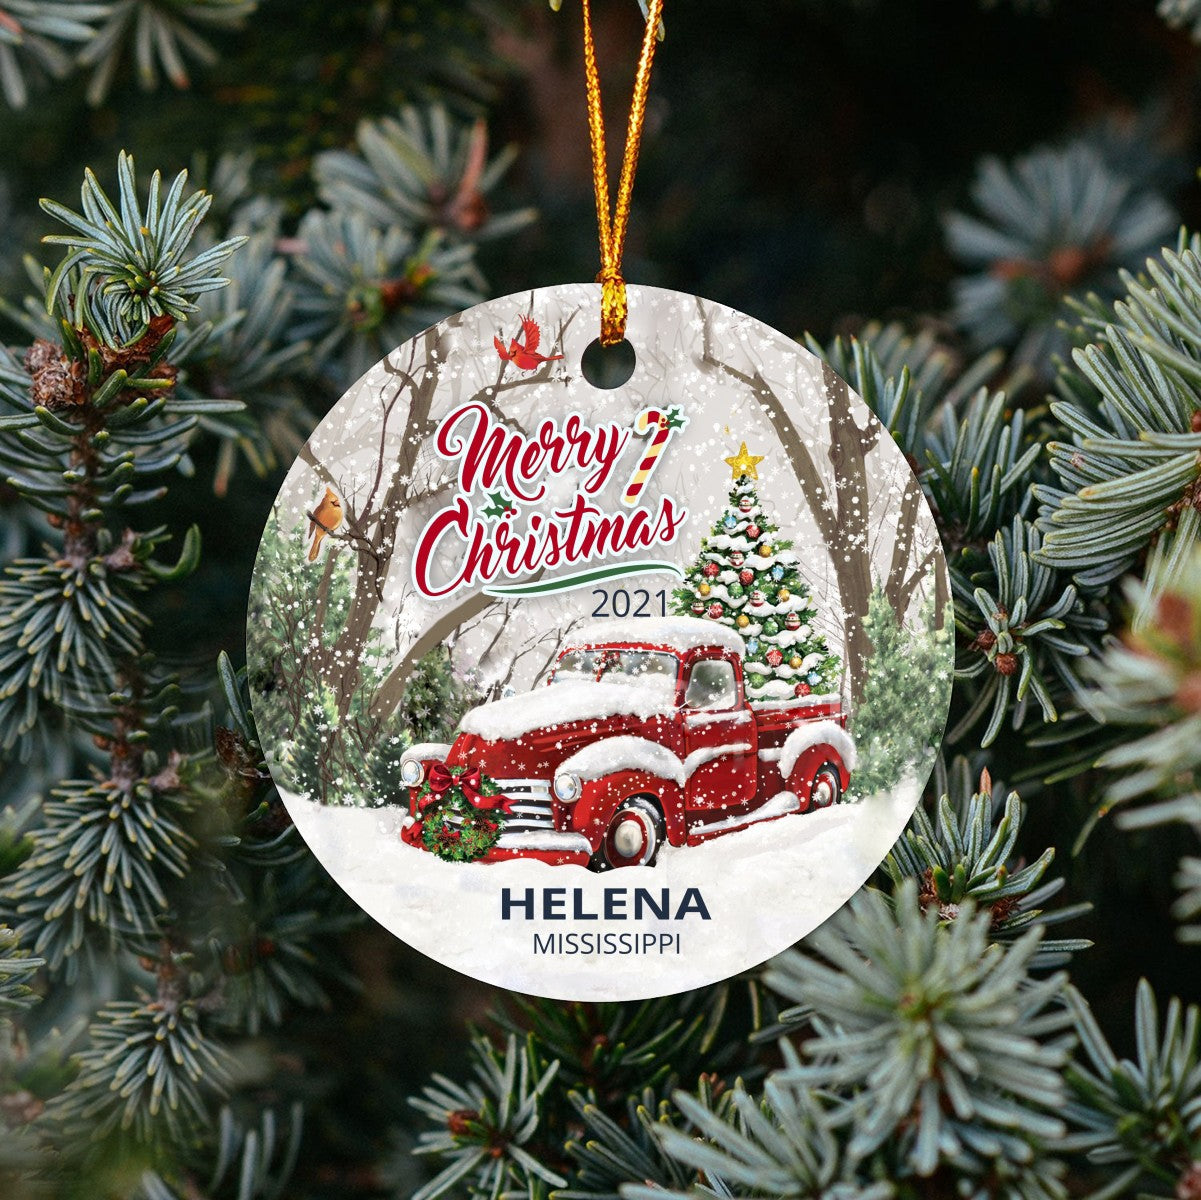 Christmas Tree Ornaments Helena - Ornament With Name City, State Helena Mississippi MS Ornament - Red Truck Xmas Ornaments 3'' Plastic Gift For Family, Friend And Housewarming